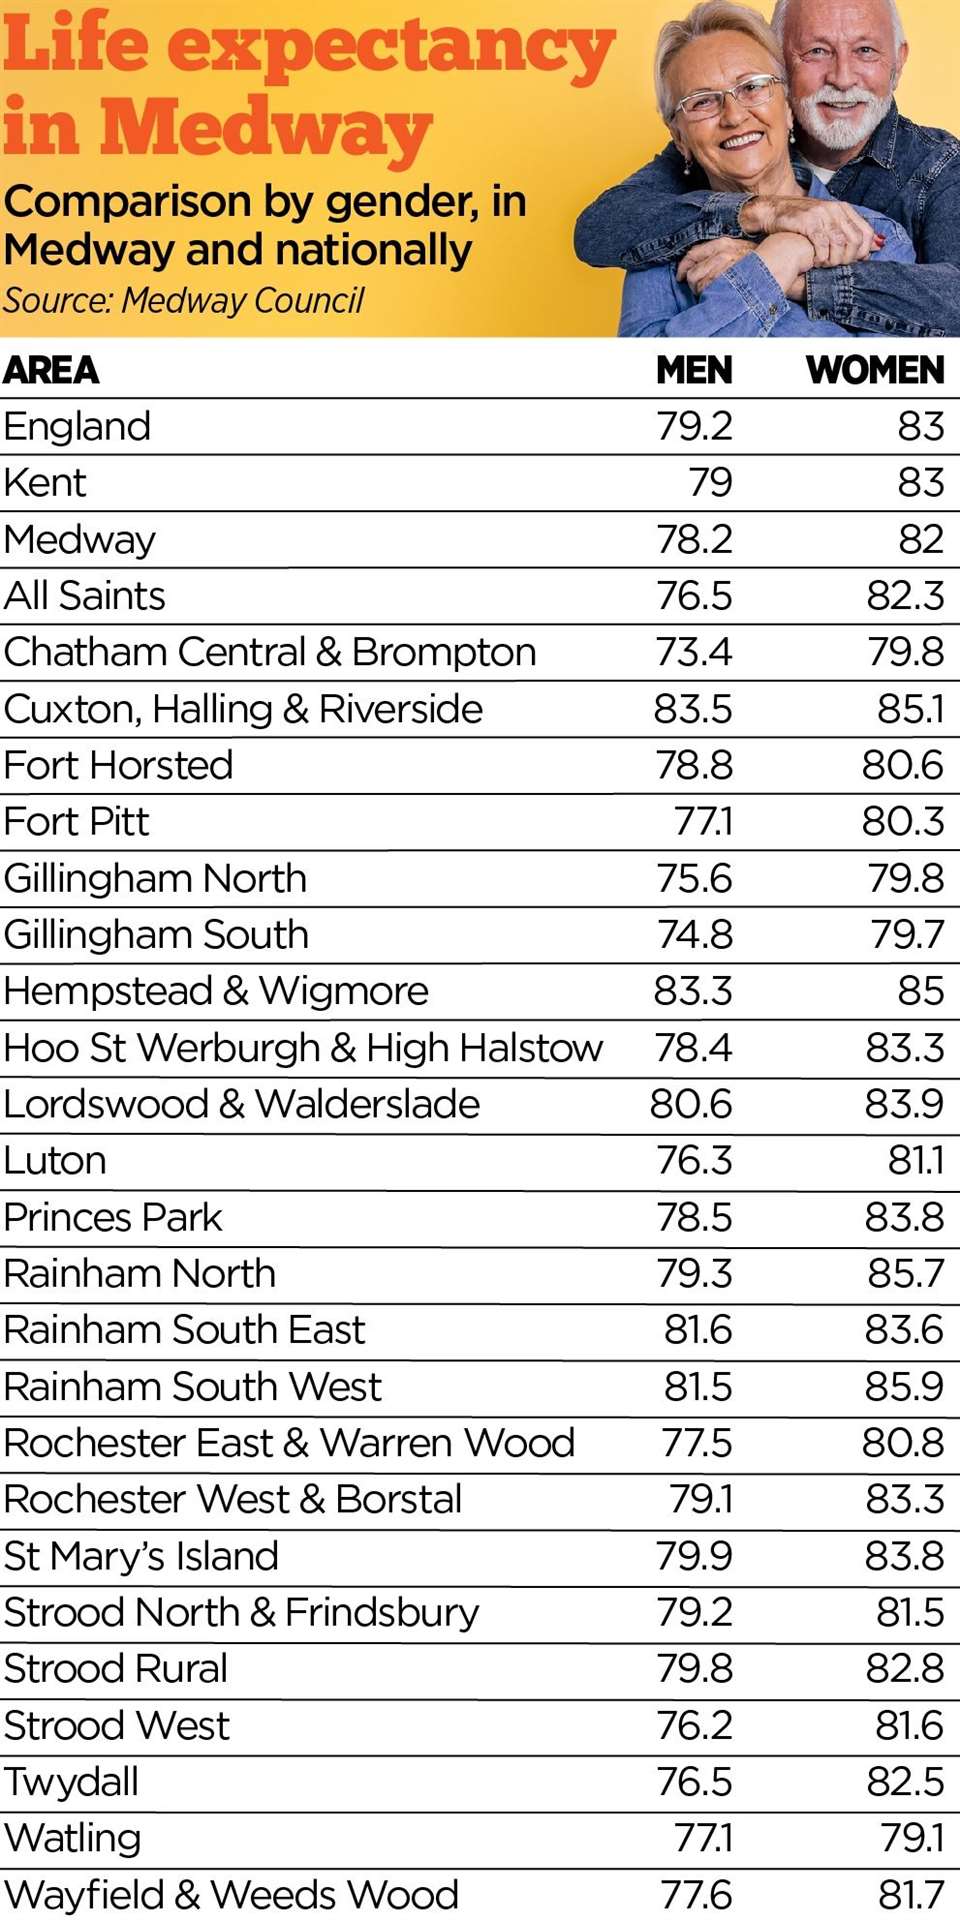 A table showing life expectancy in comparison by gender, in Medway and nationally